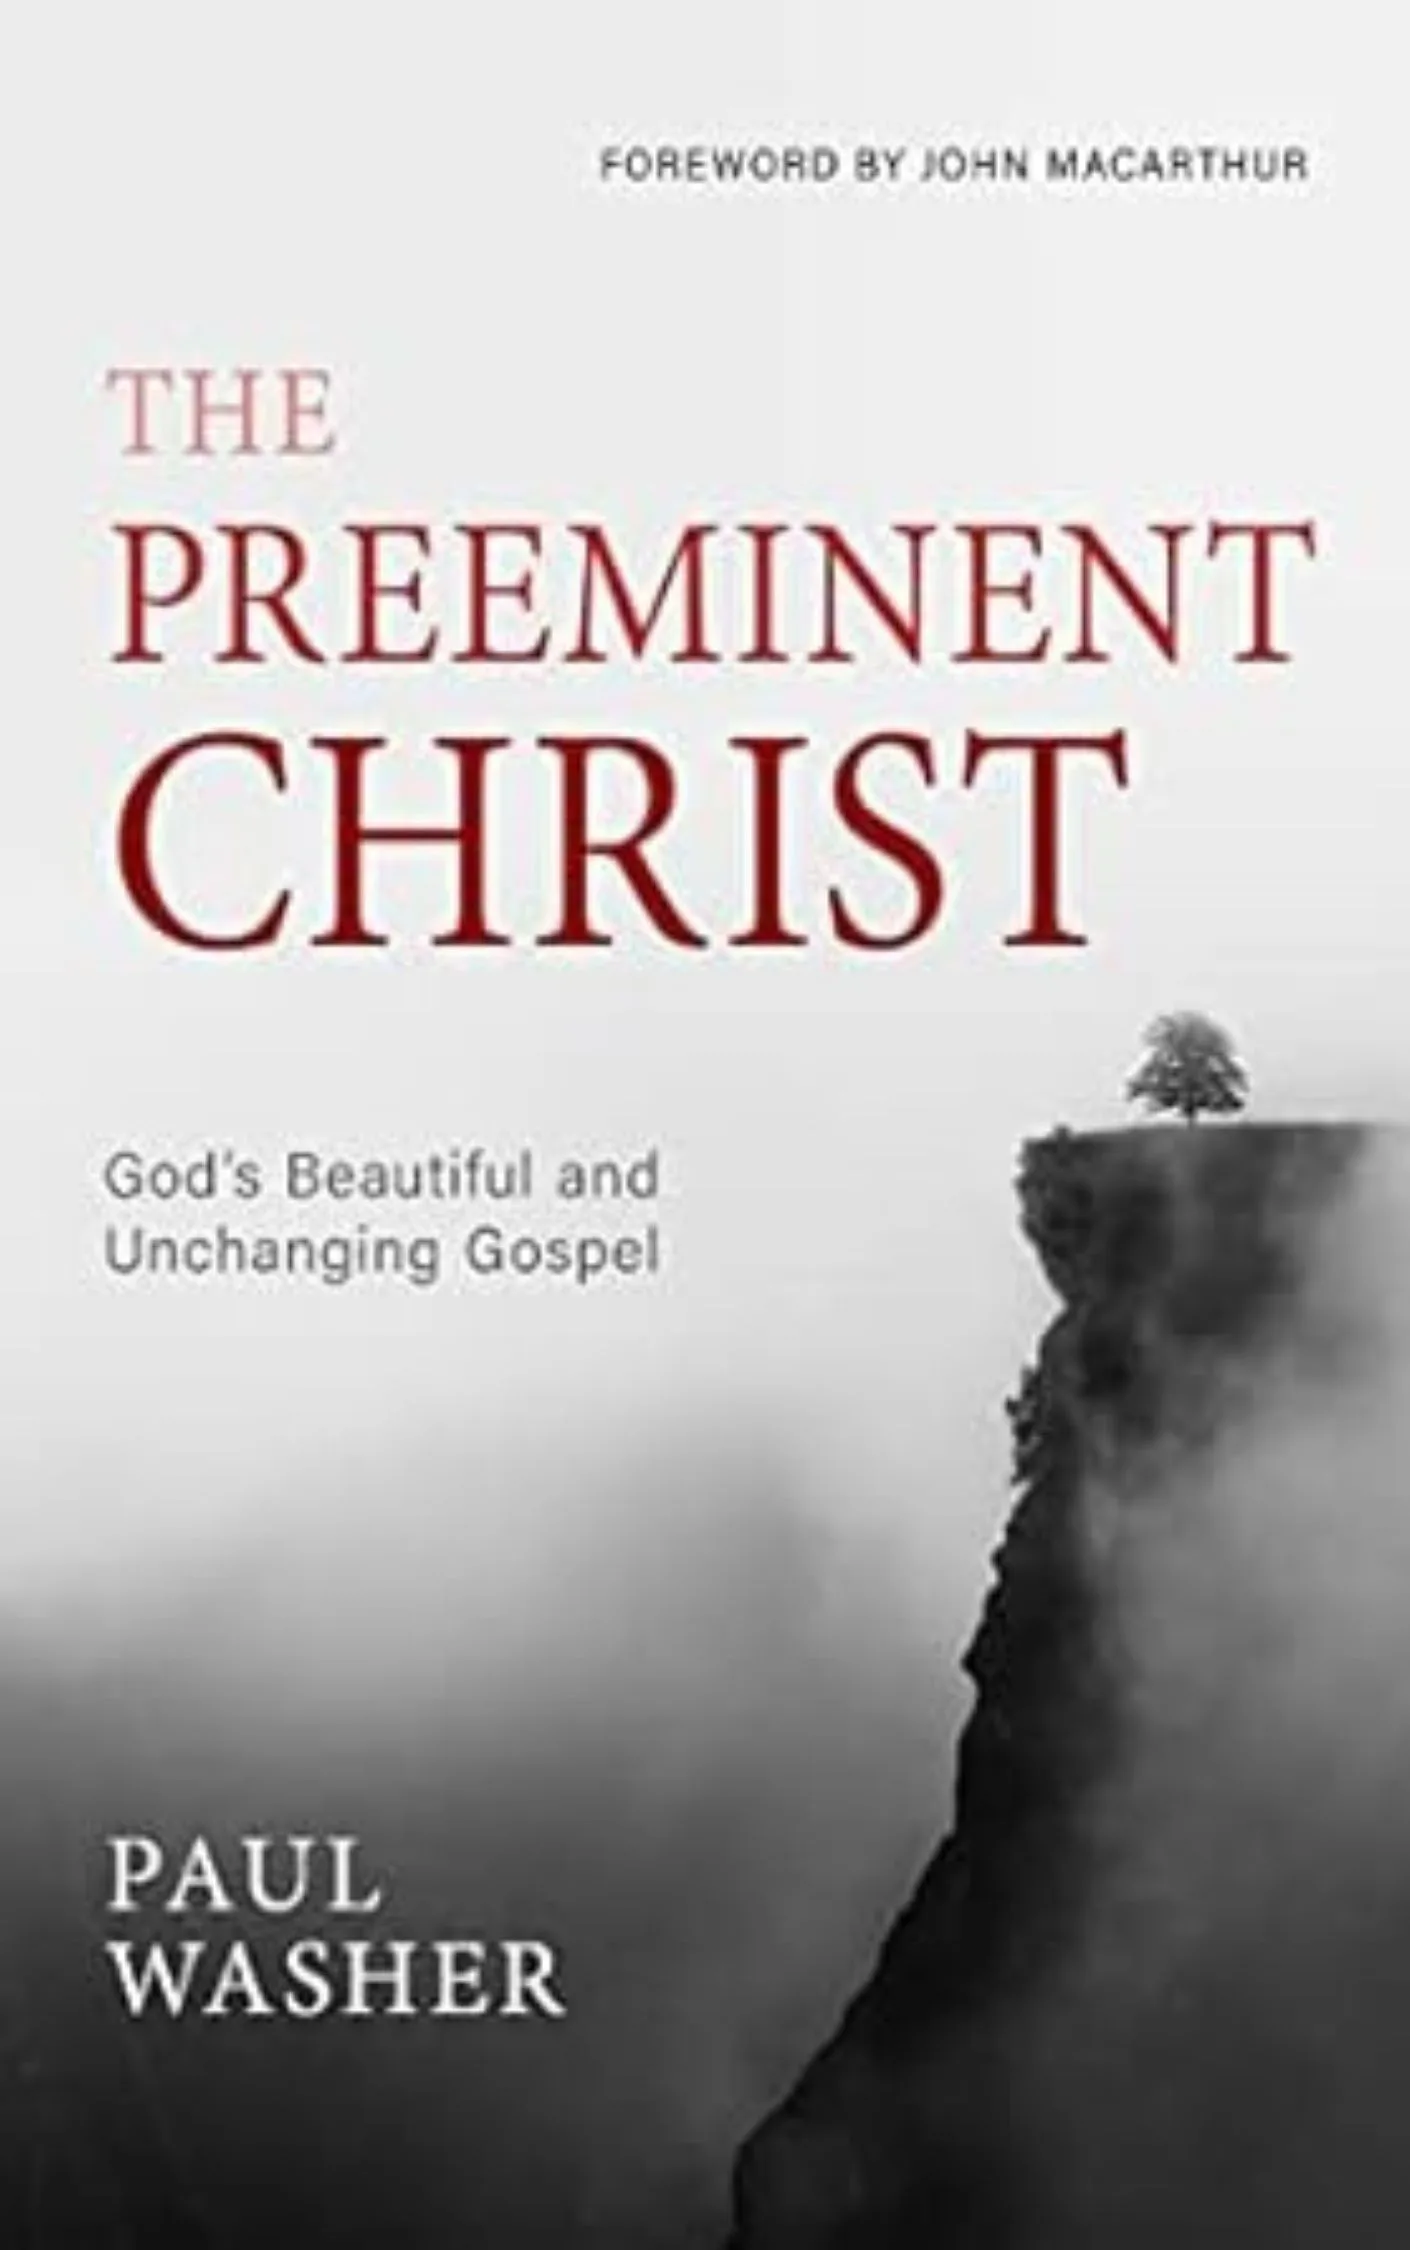 The Preeminent Christ by Paul Washer